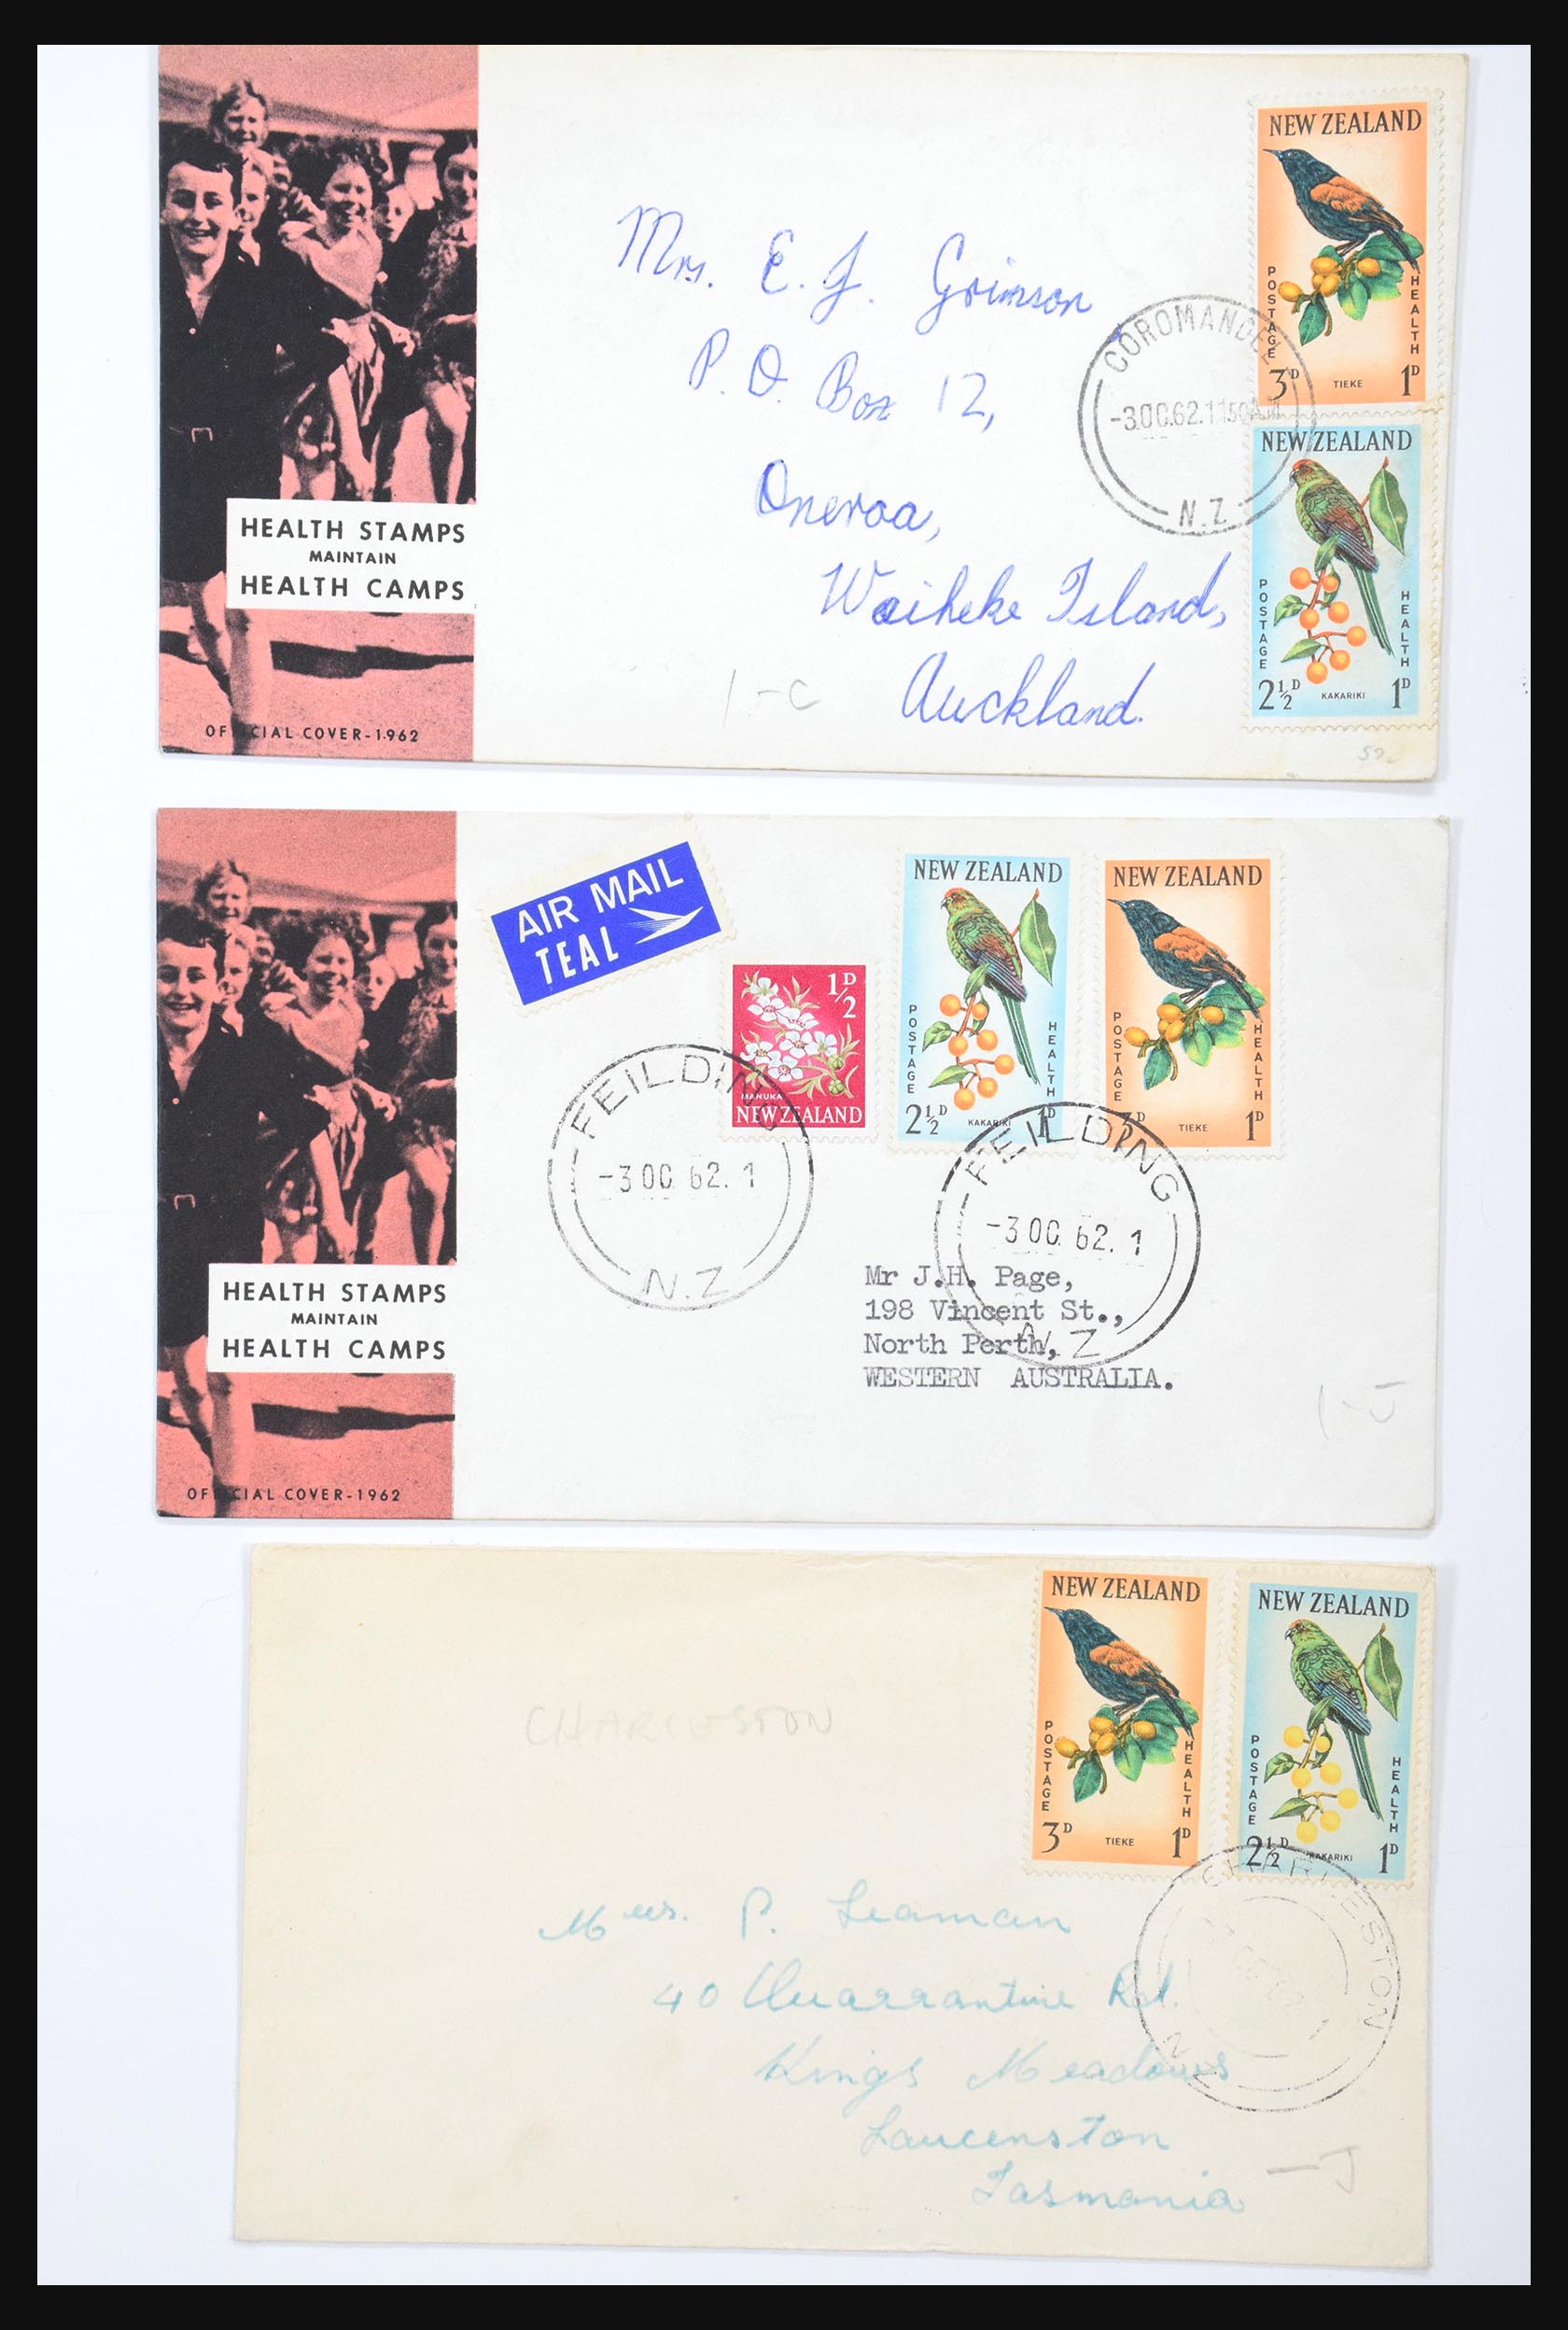 30821 033 - 30821 New Zealand FDC's 1960-1971.